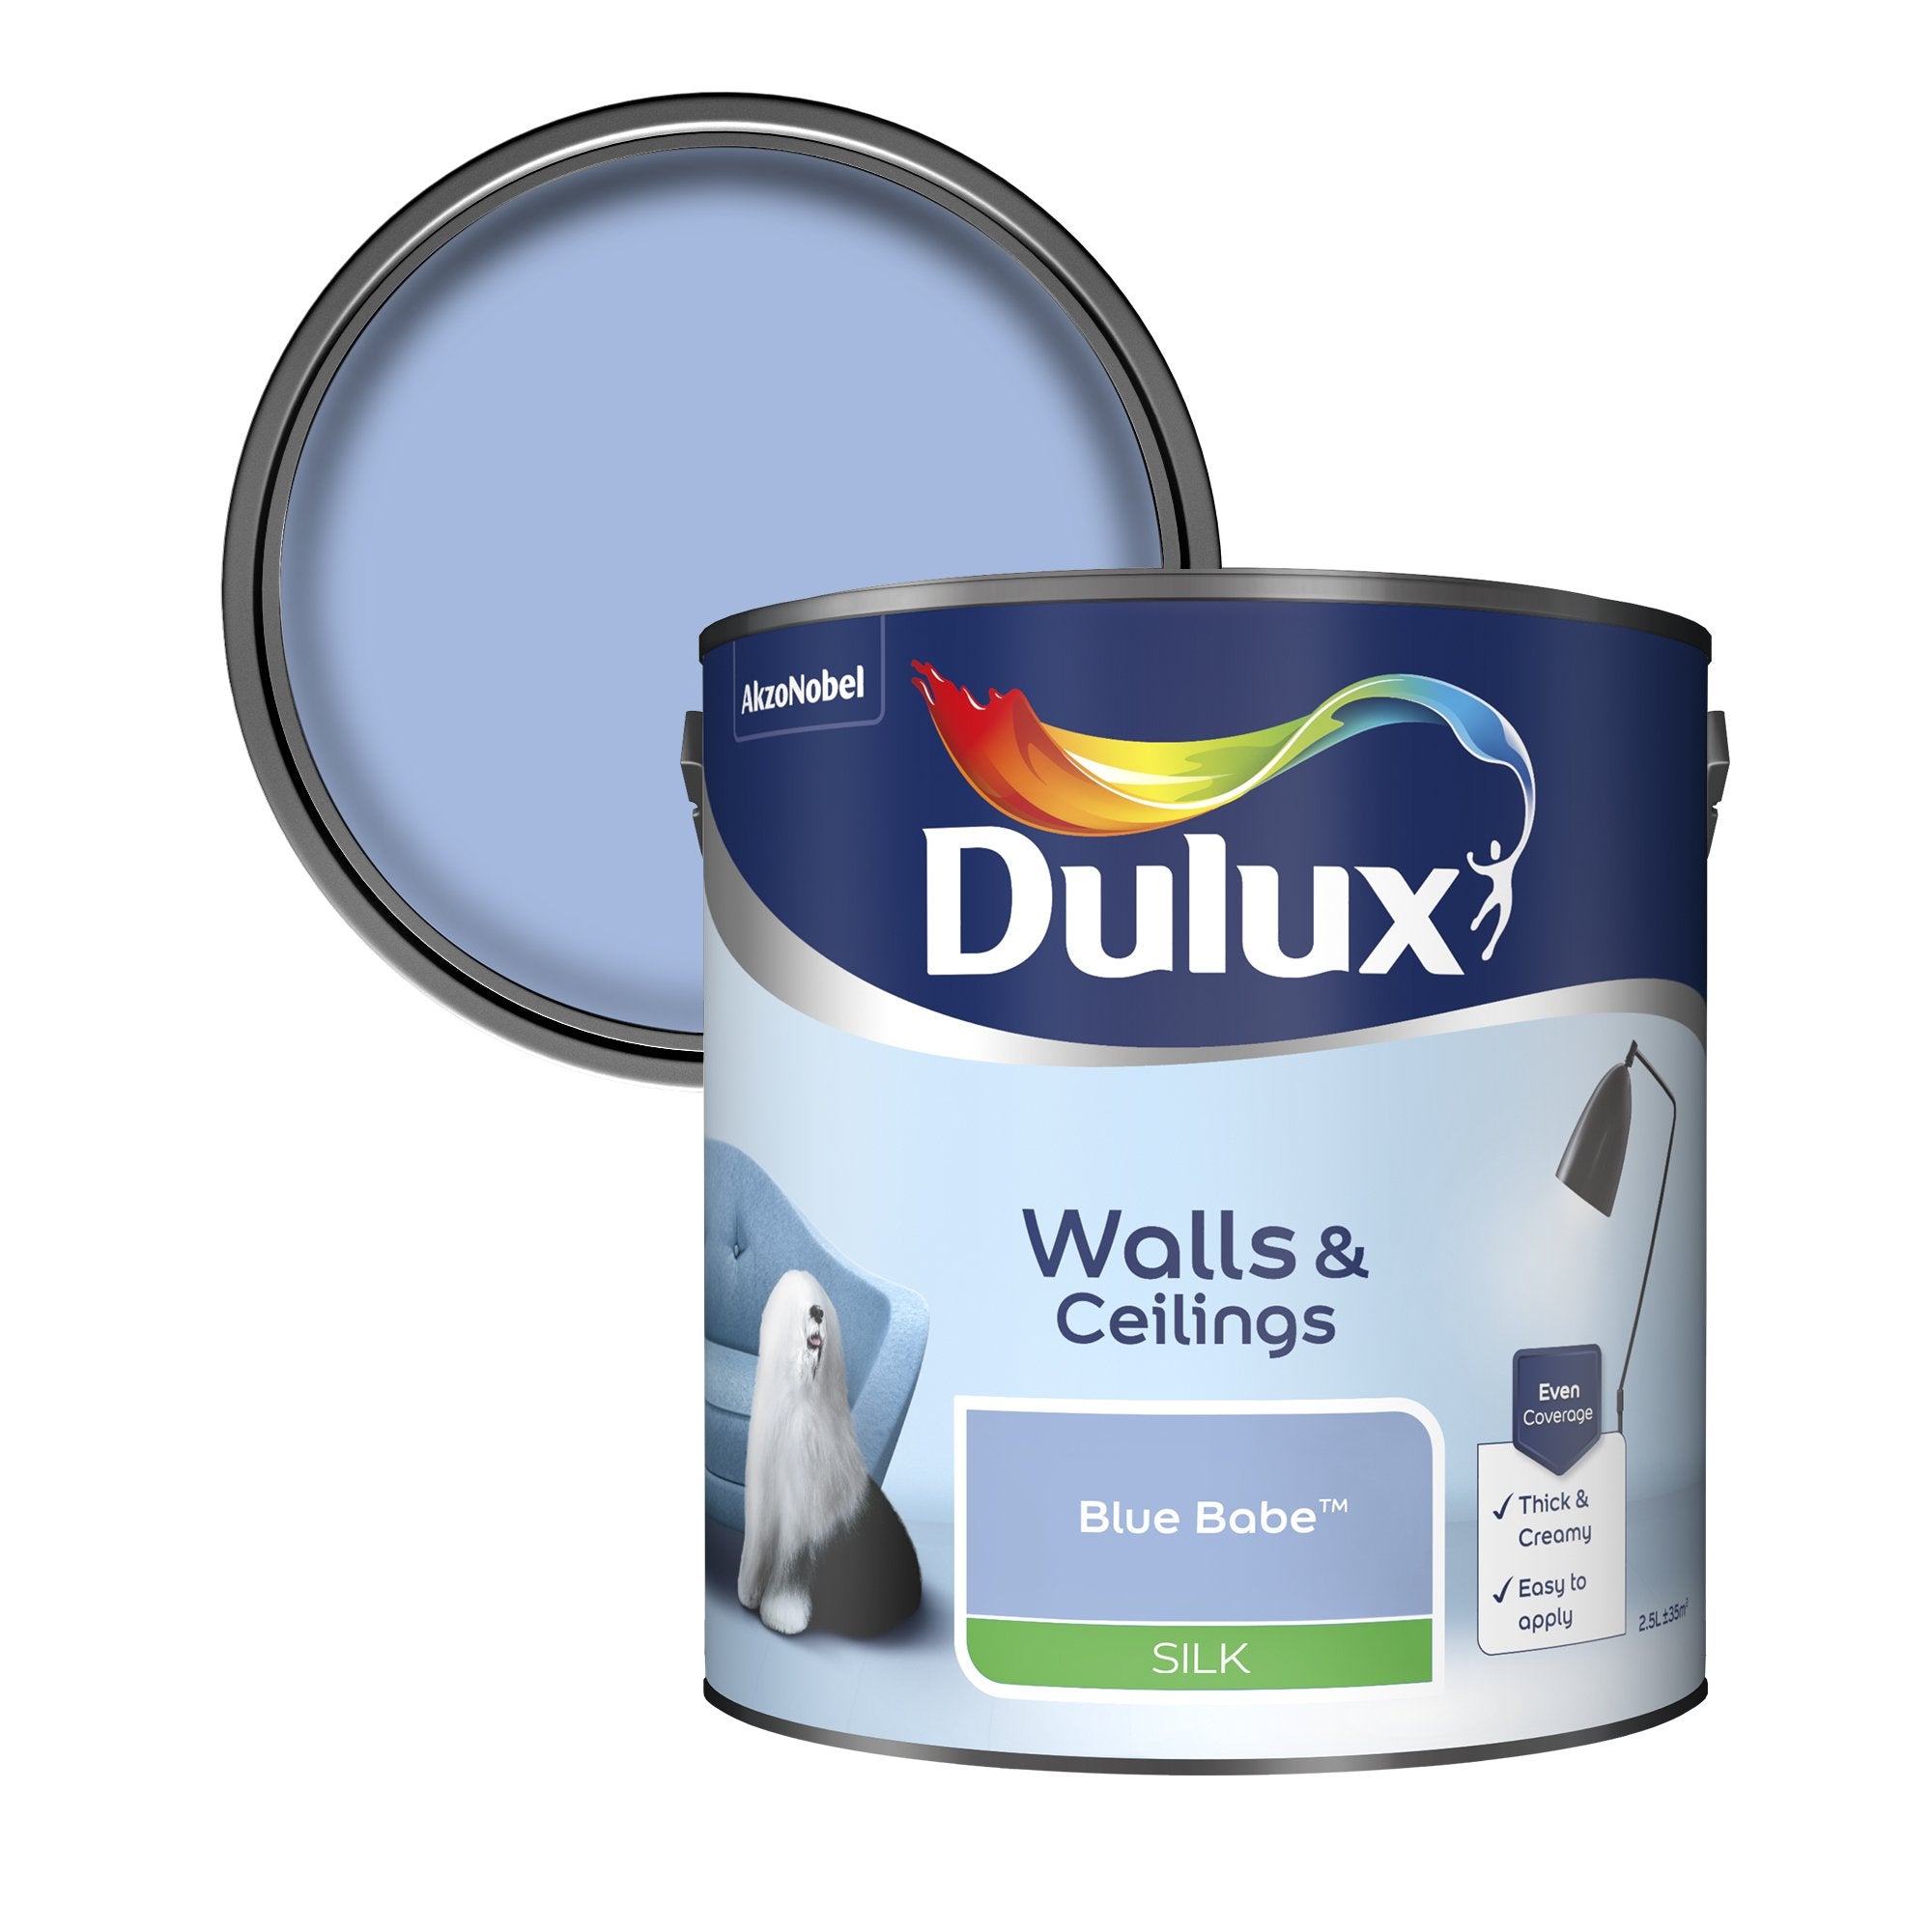 Dulux-Silk-Emulsion-Paint-For-Walls-And-Ceilings-Blue-Babe-2.5L